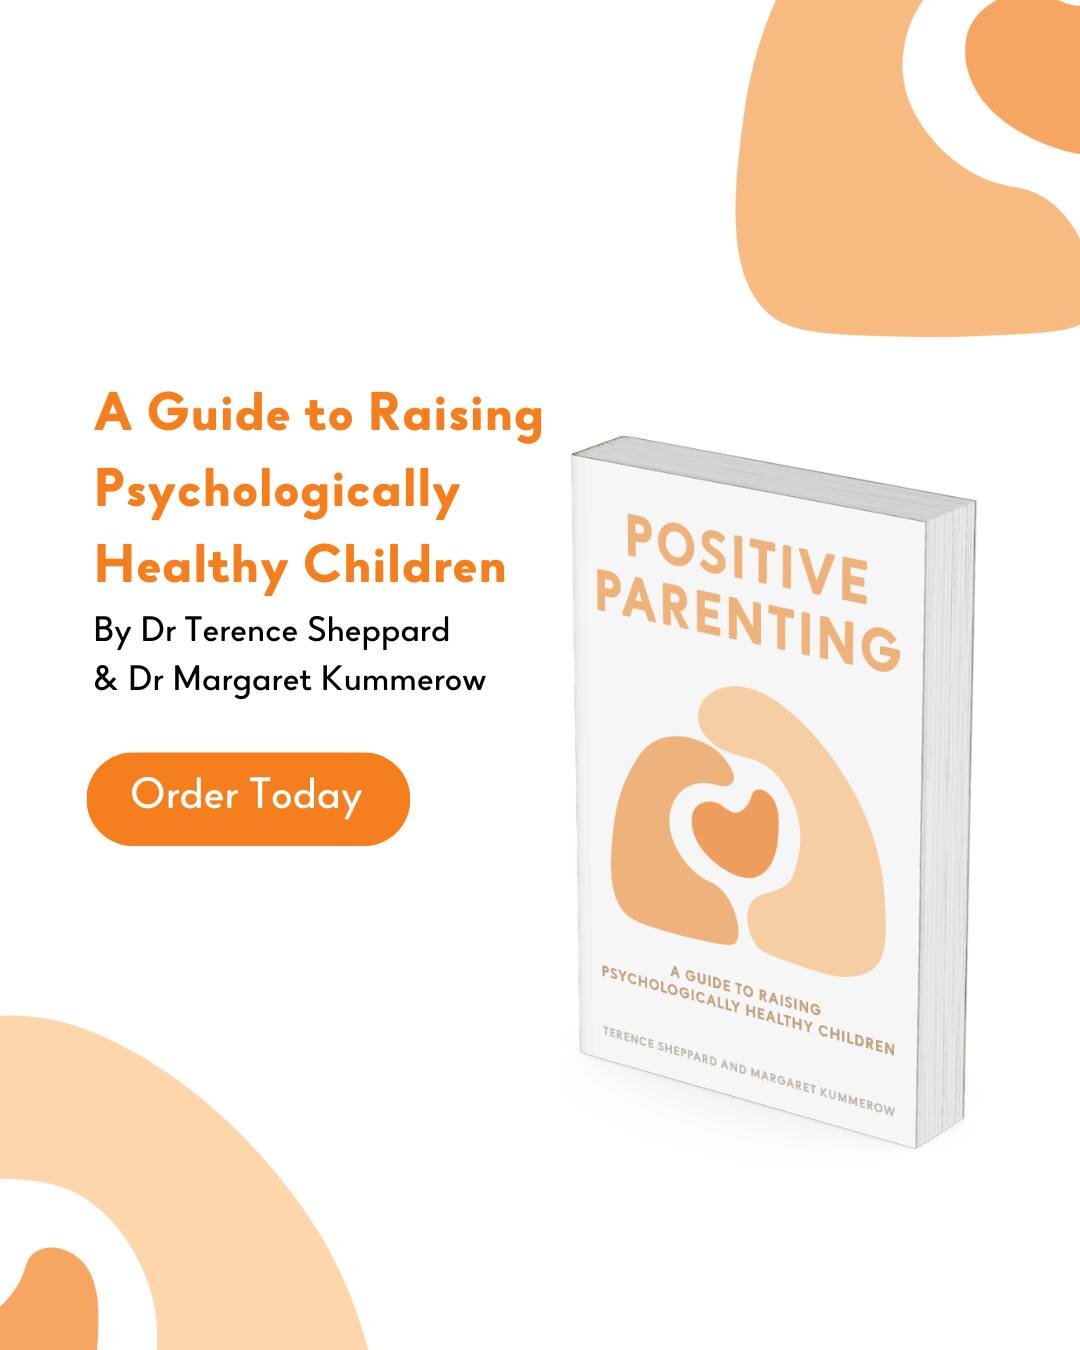 Preparing your future adults to succeed in the life they choose is up to you, but how to go about it? Learn to navigate the joys and challenges of raising resilient kids with parenting insights from Dr Terence Sheppard and Dr Margaret Kummerow. 

Vis